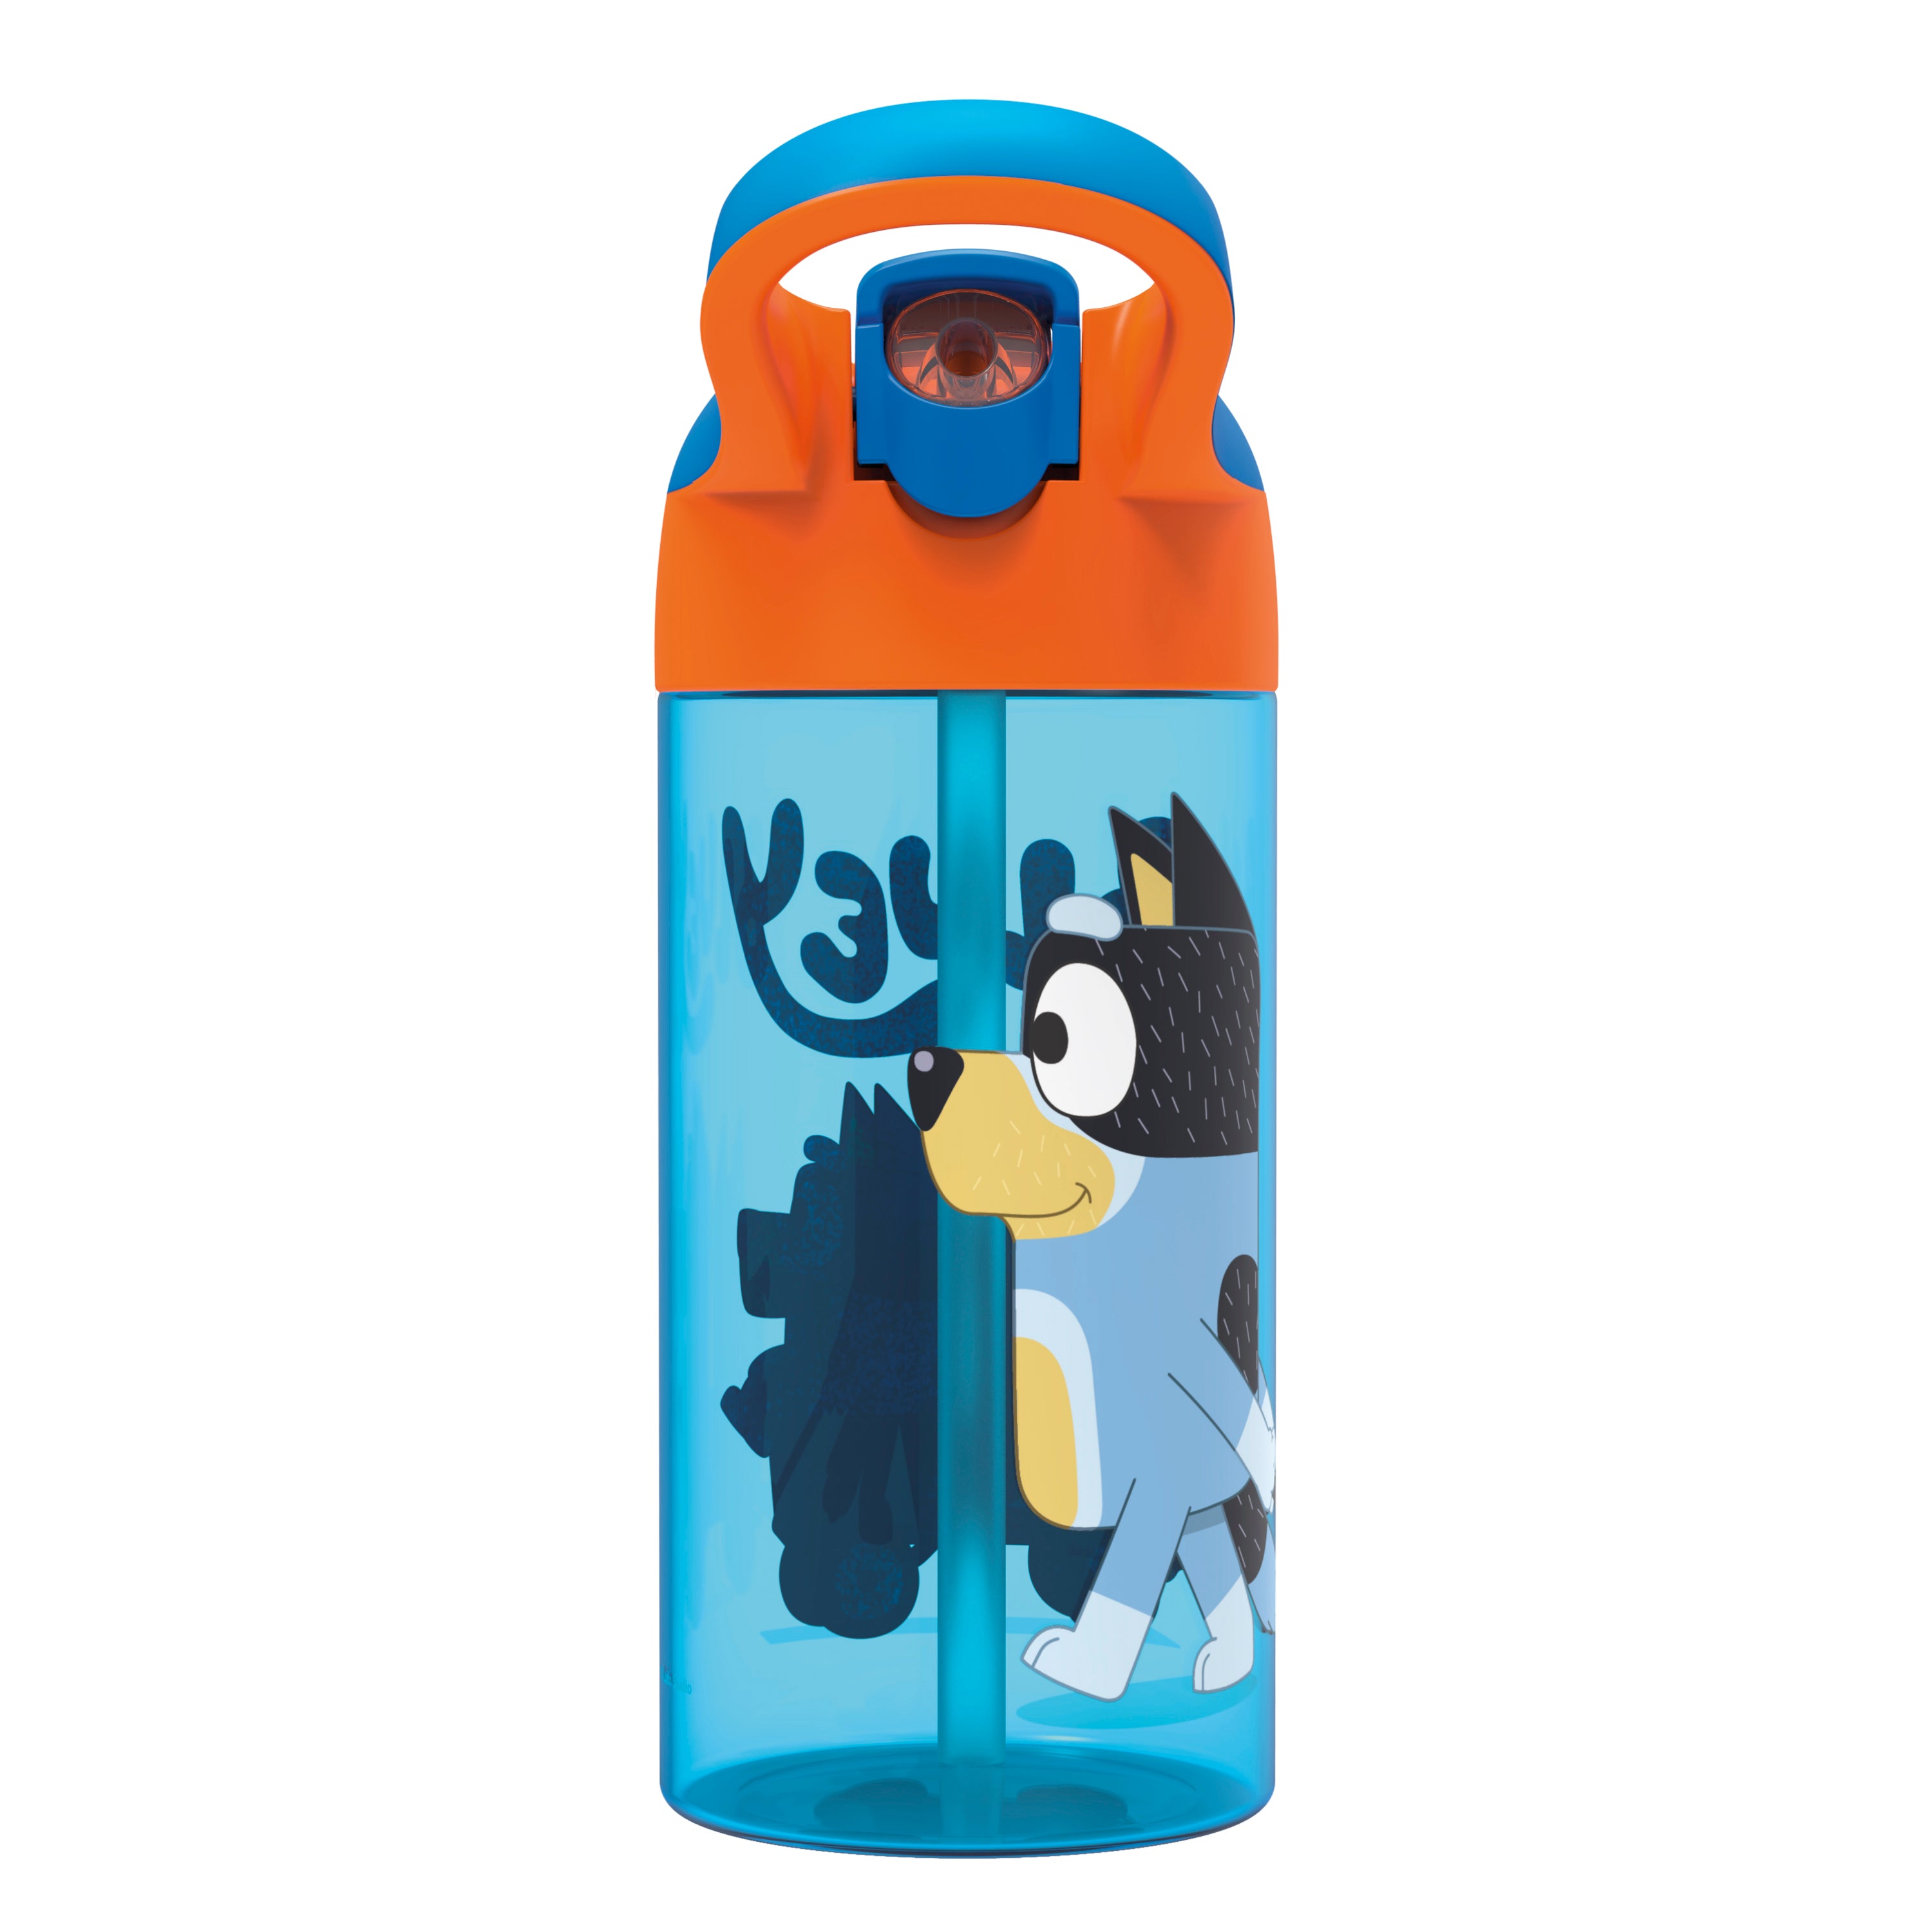 Bluey Kids Leak Proof Water Bottle with Push Button Lid and Spout - 17.5  Ounces —